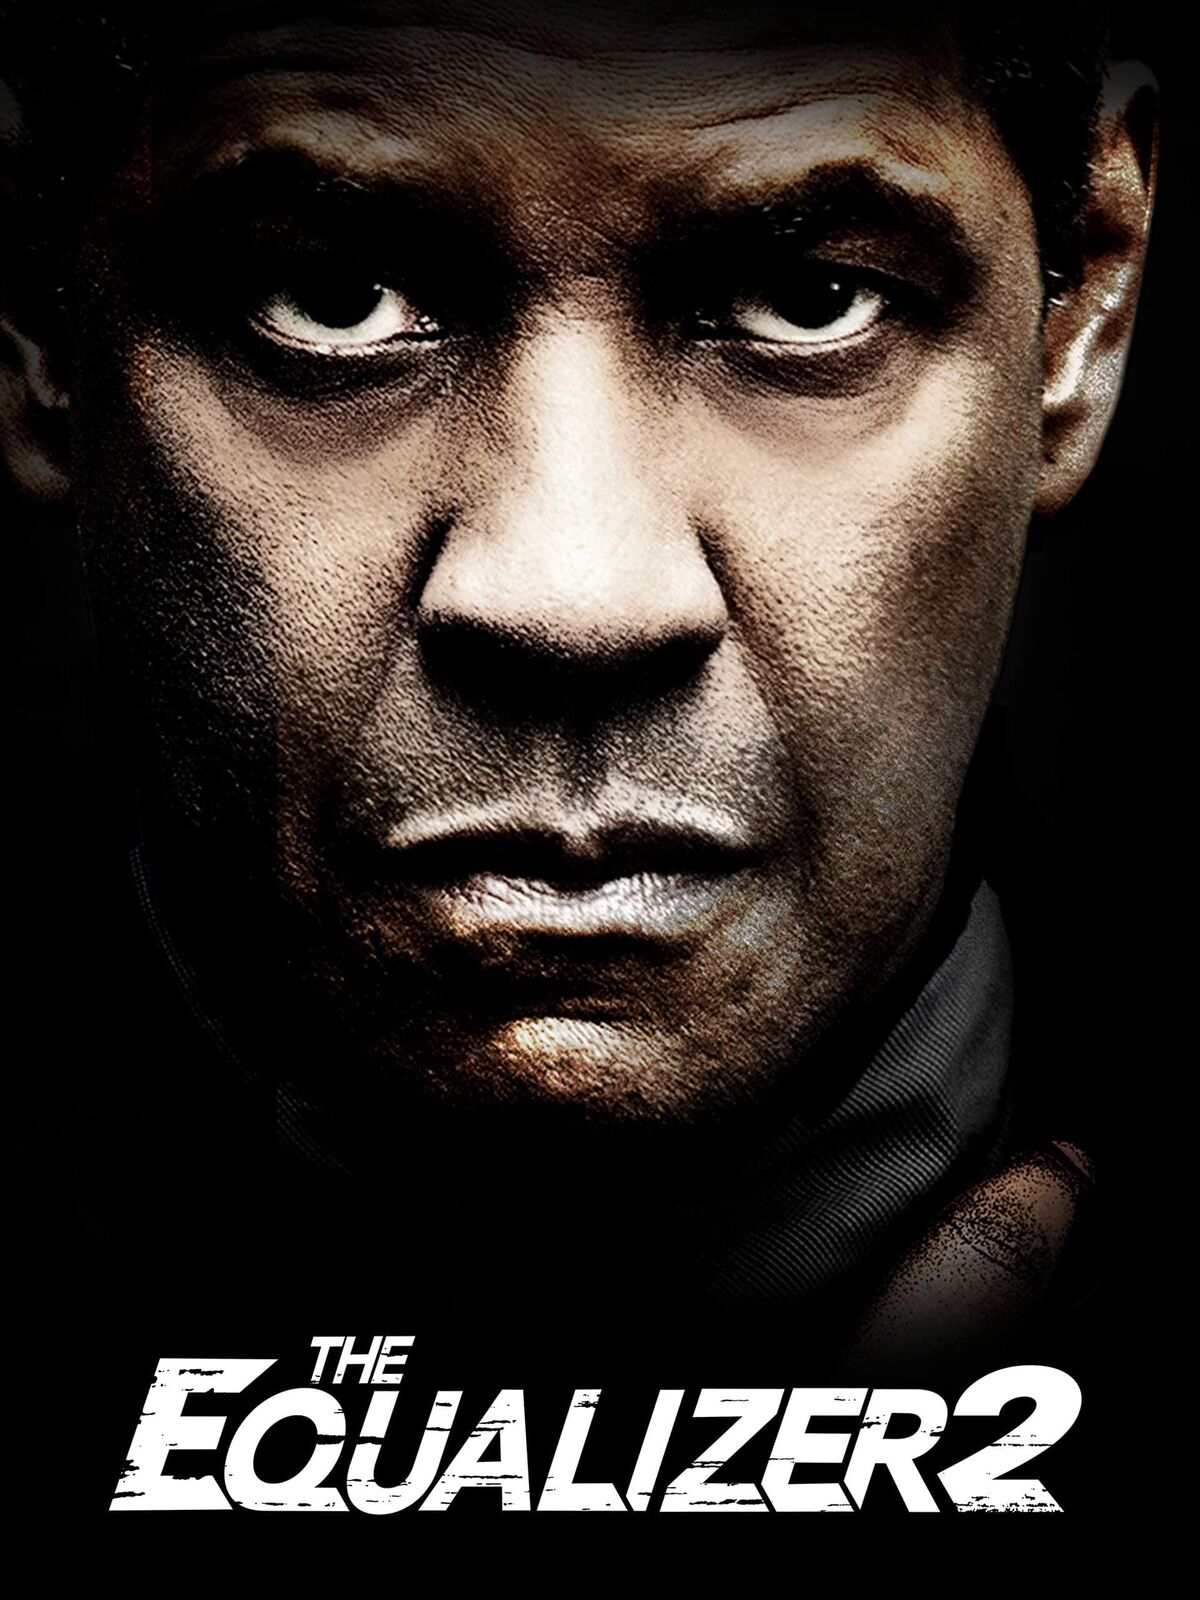 https://static.wikia.nocookie.net/the-equalizer/images/3/34/The_Equalizer_2_poster_7.jpg/revision/latest/scale-to-width-down/1200?cb=20230903123918